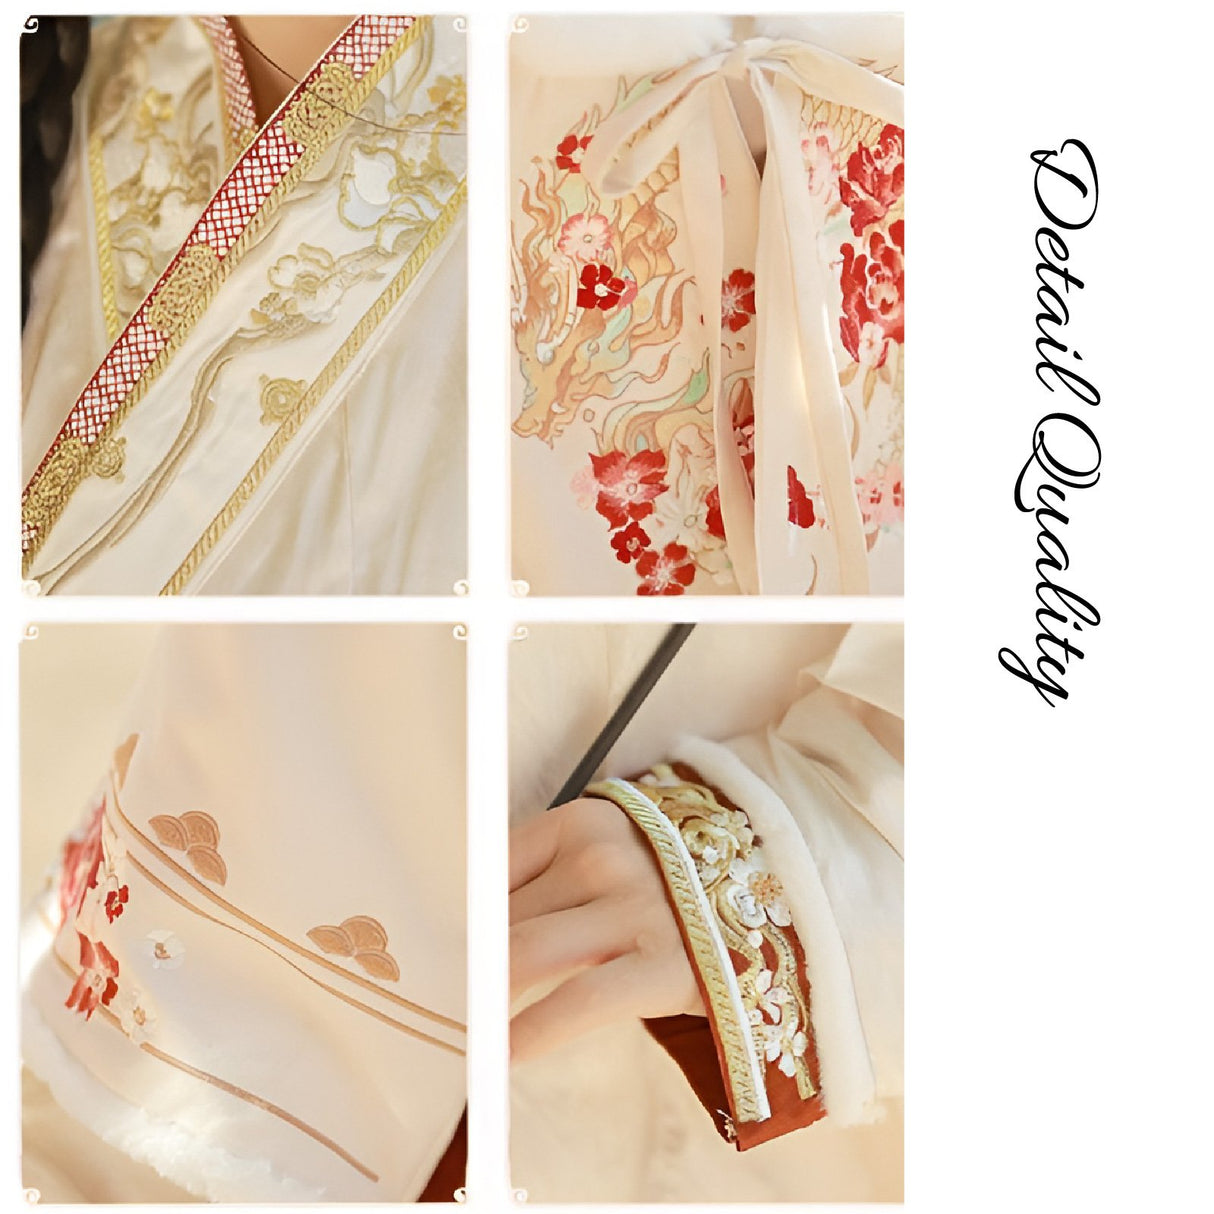 Evening Autumn Ming-Style Hanfu Dress with Rich Embroidery for Cooler Seasons